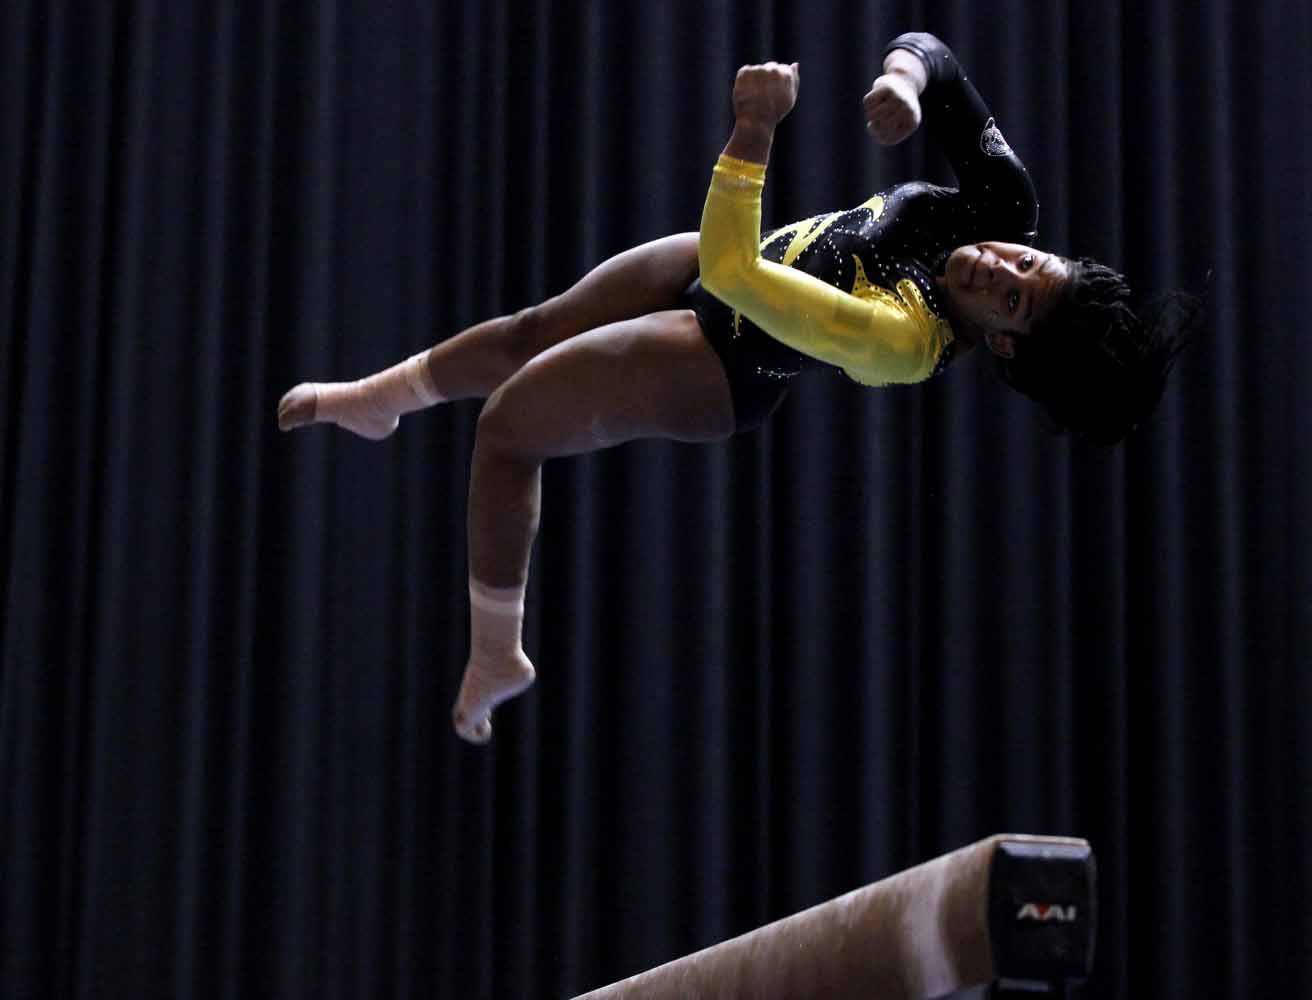 Mizzou sophomore Tia Allbritten jumps and twists during her performance on the balance beam Friday evening, Feb. 19, 2016 during the gymnastics competition against the University of Florida.